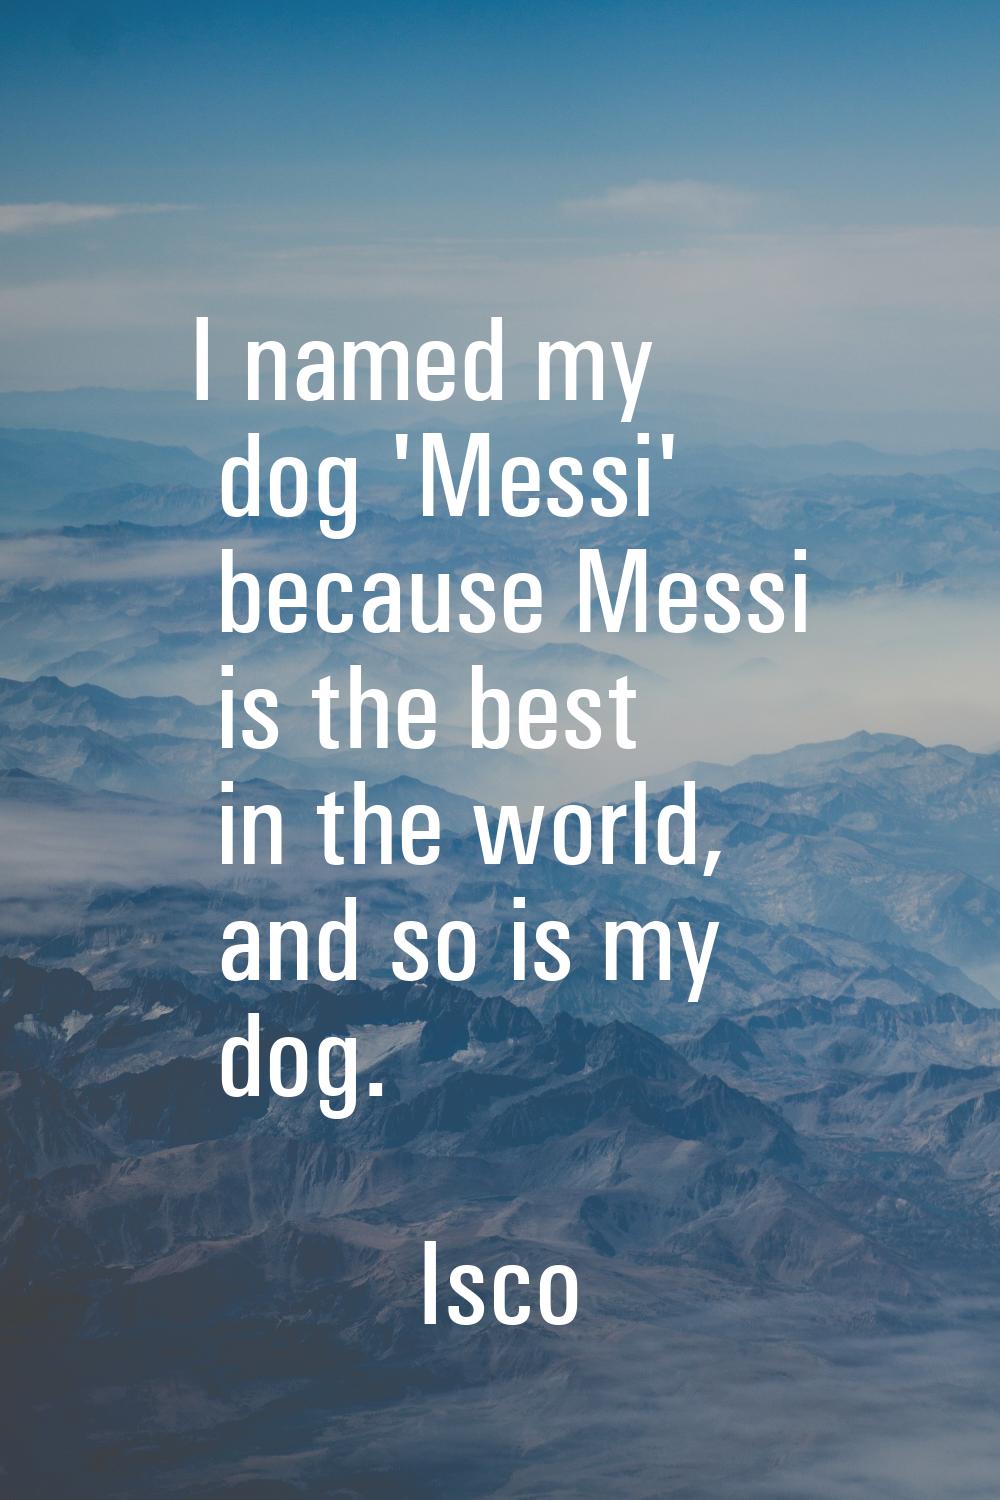 I named my dog 'Messi' because Messi is the best in the world, and so is my dog.